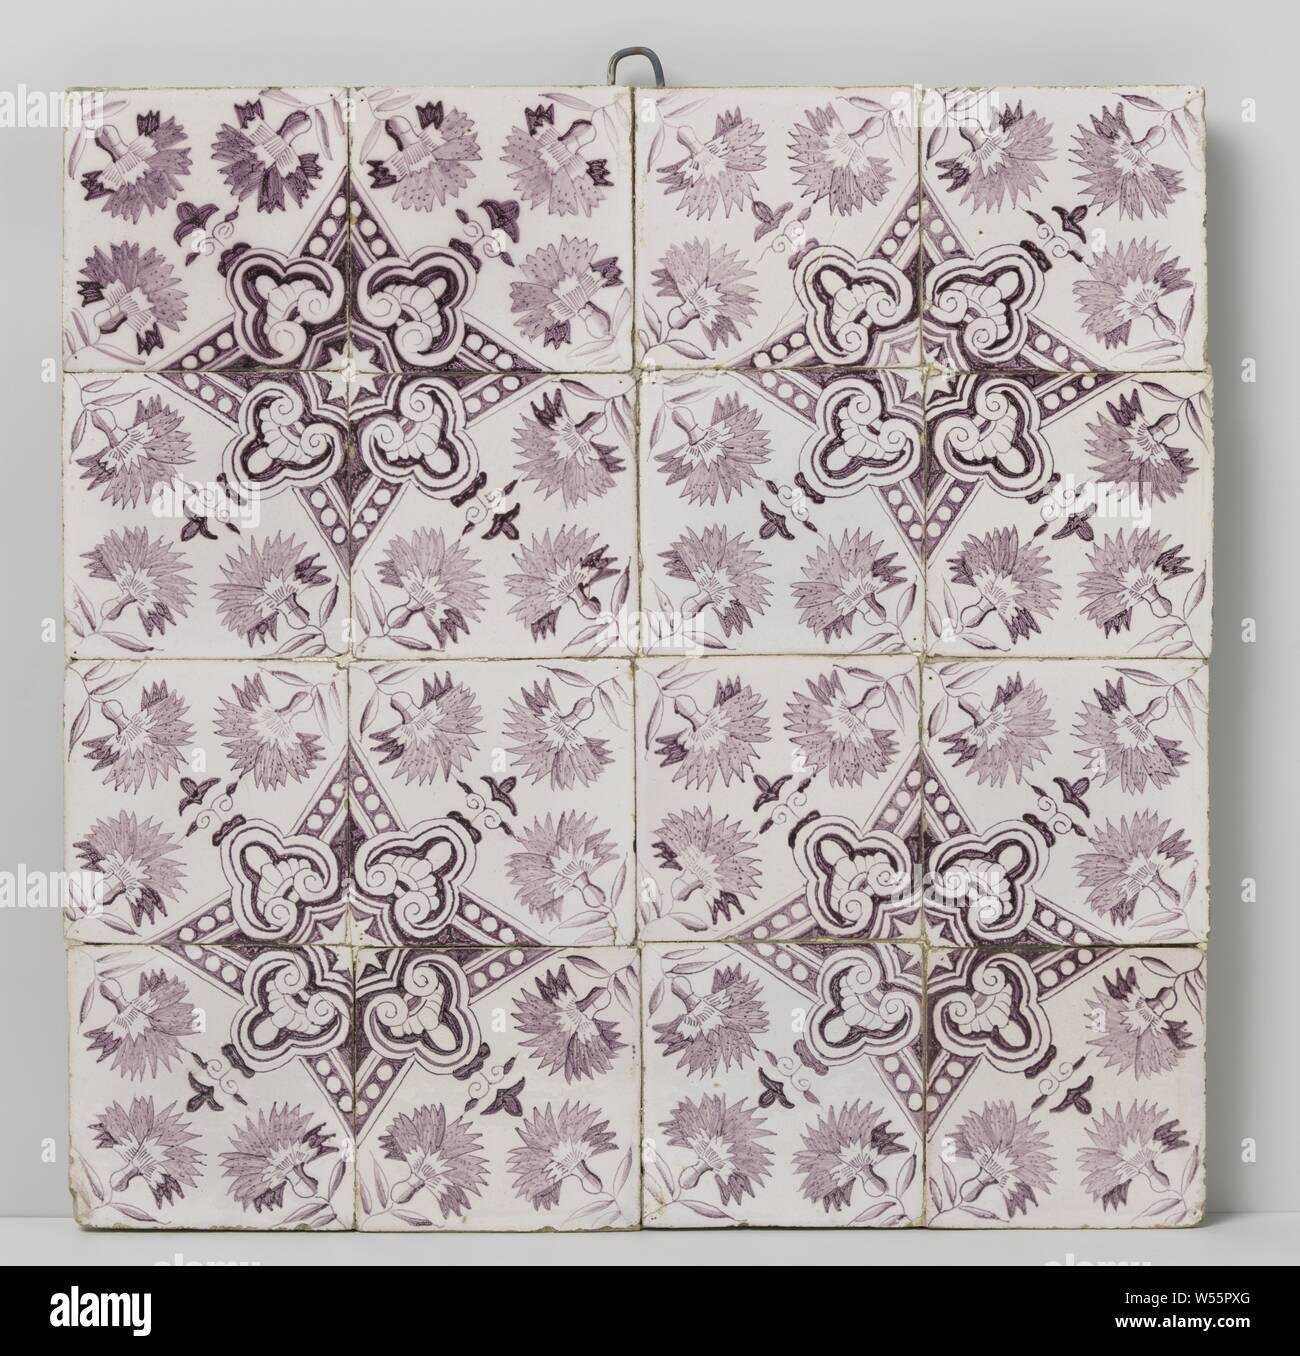 Tile field of sixteen tiles, Tile field of 16 tiles (4 x 4) with purple painted carnations. Four tiles together form a star in the middle., anonymous, 1740 - 1790, earthenware, tin glaze, h 51 cm × w 51 cm × d 2 cm Stock Photo